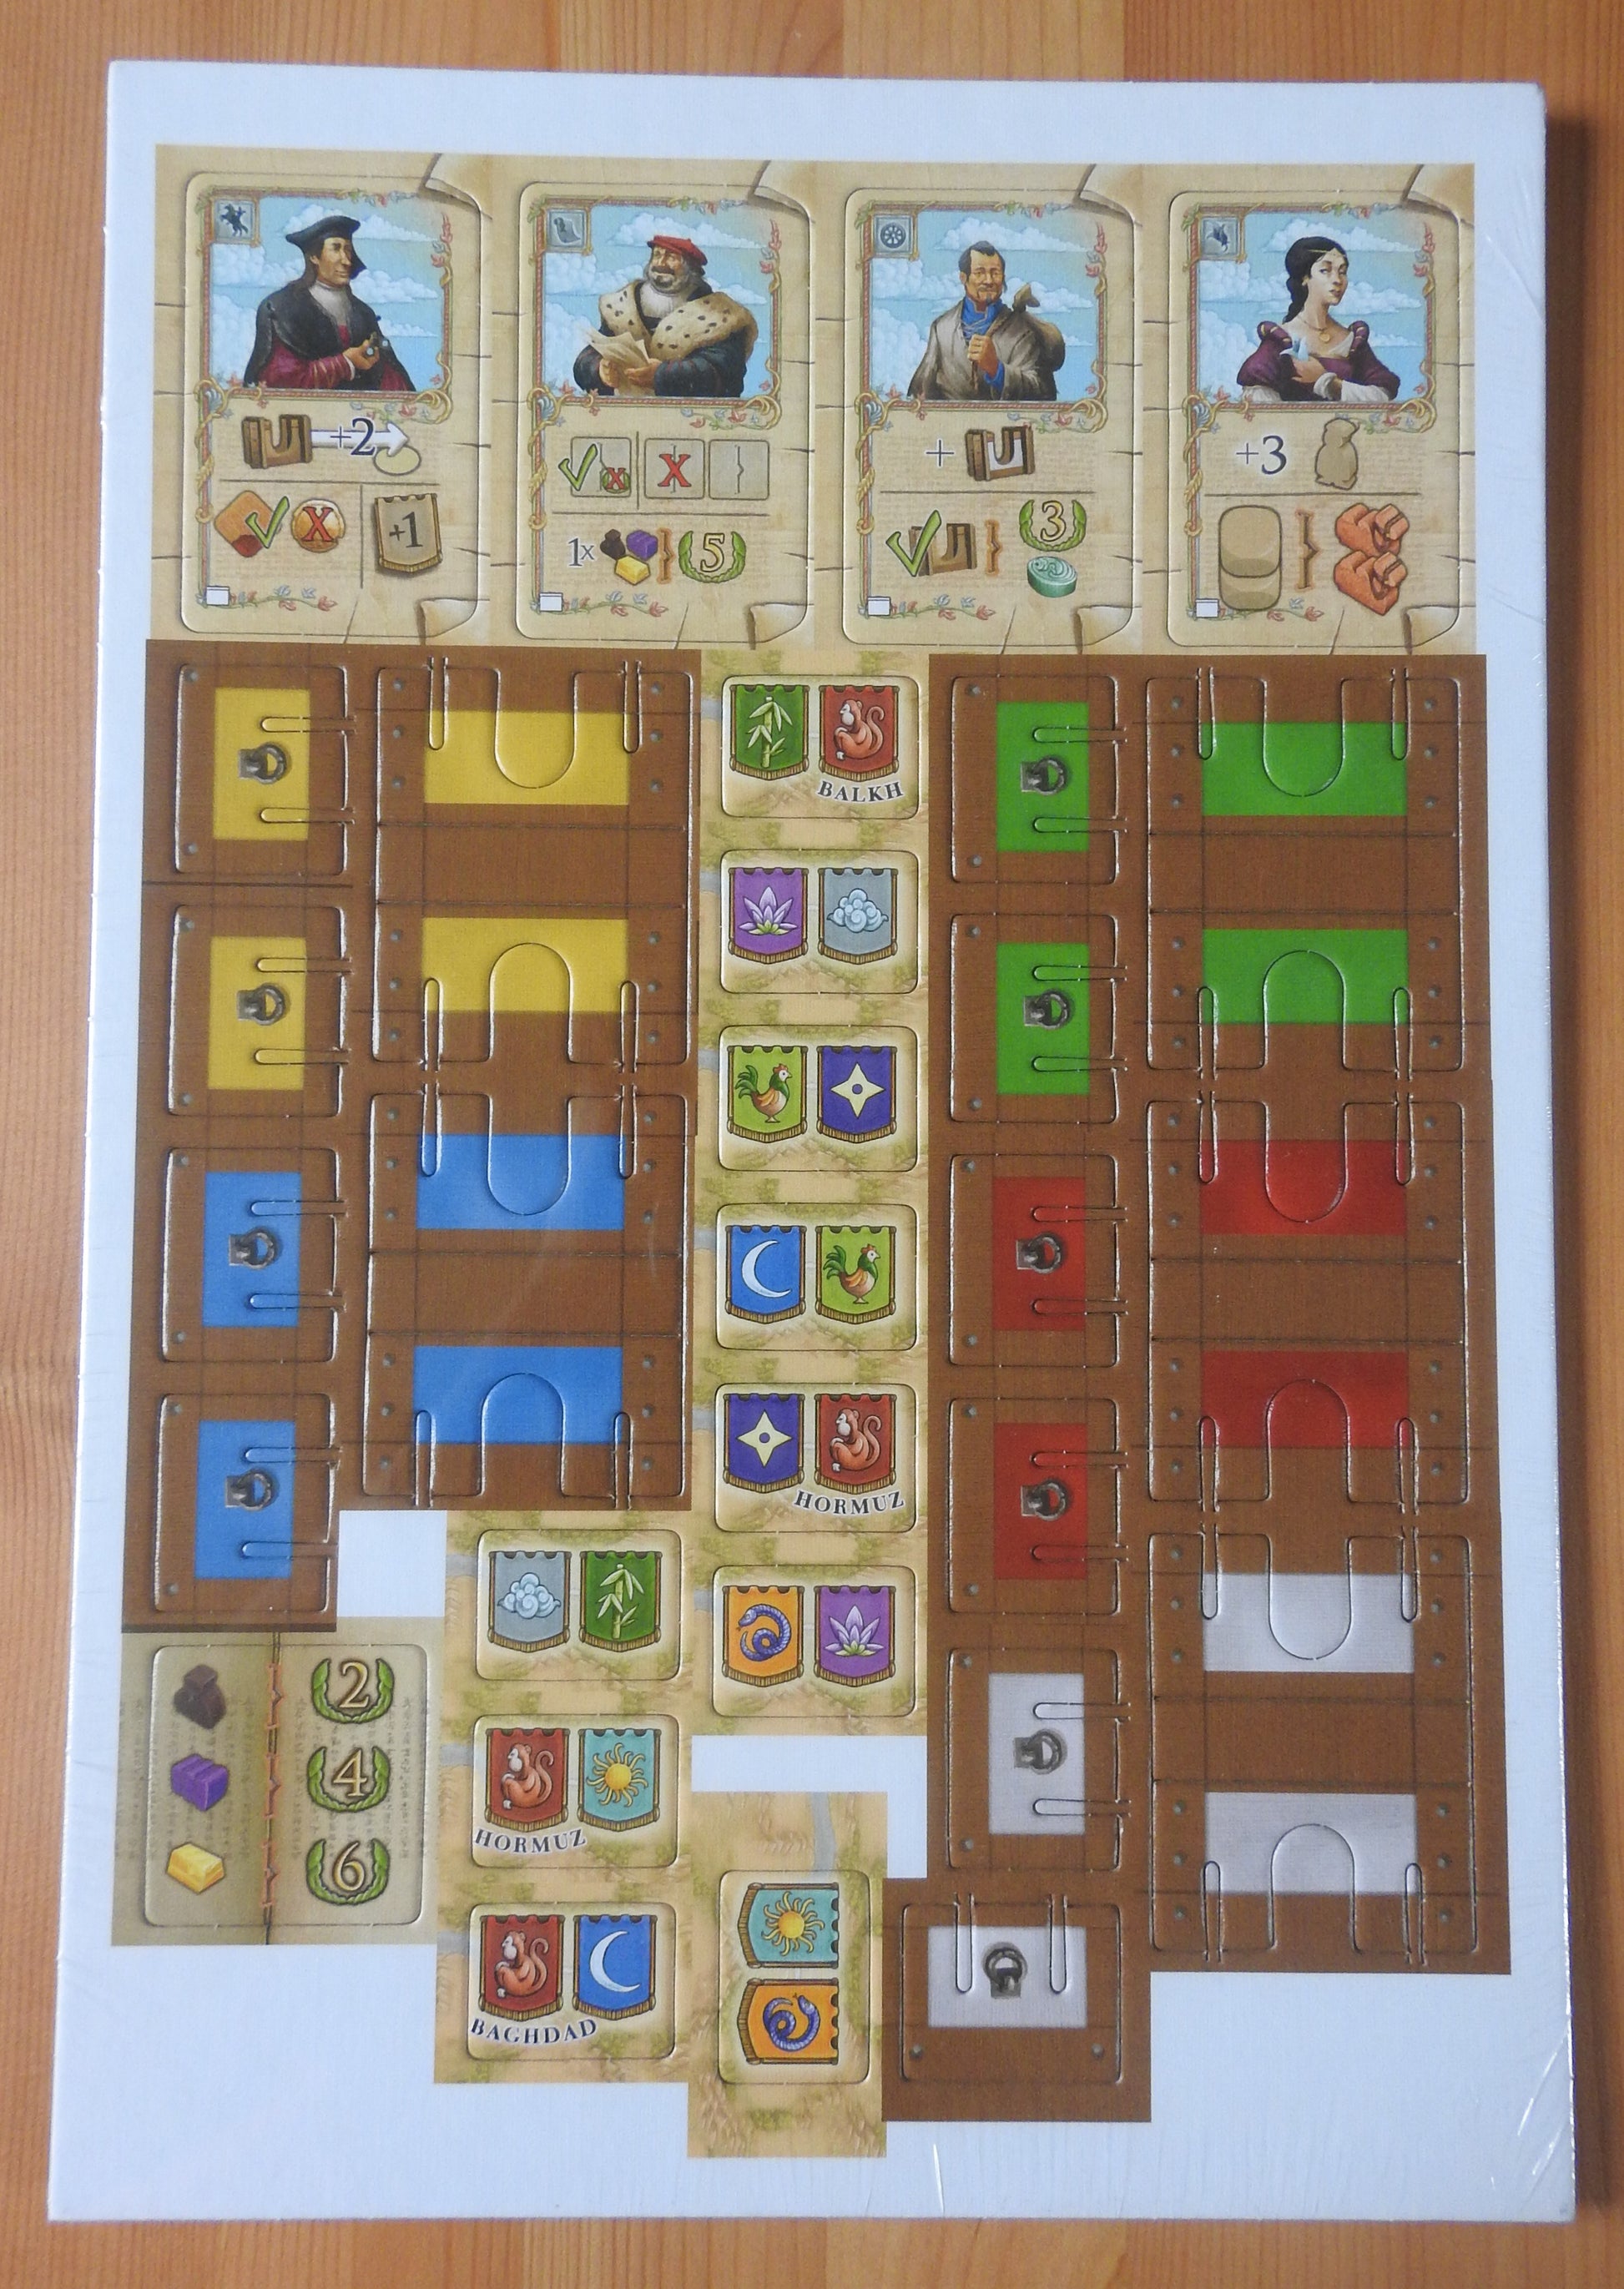 Top view of all the tokens and new characters included in this mini expansion.